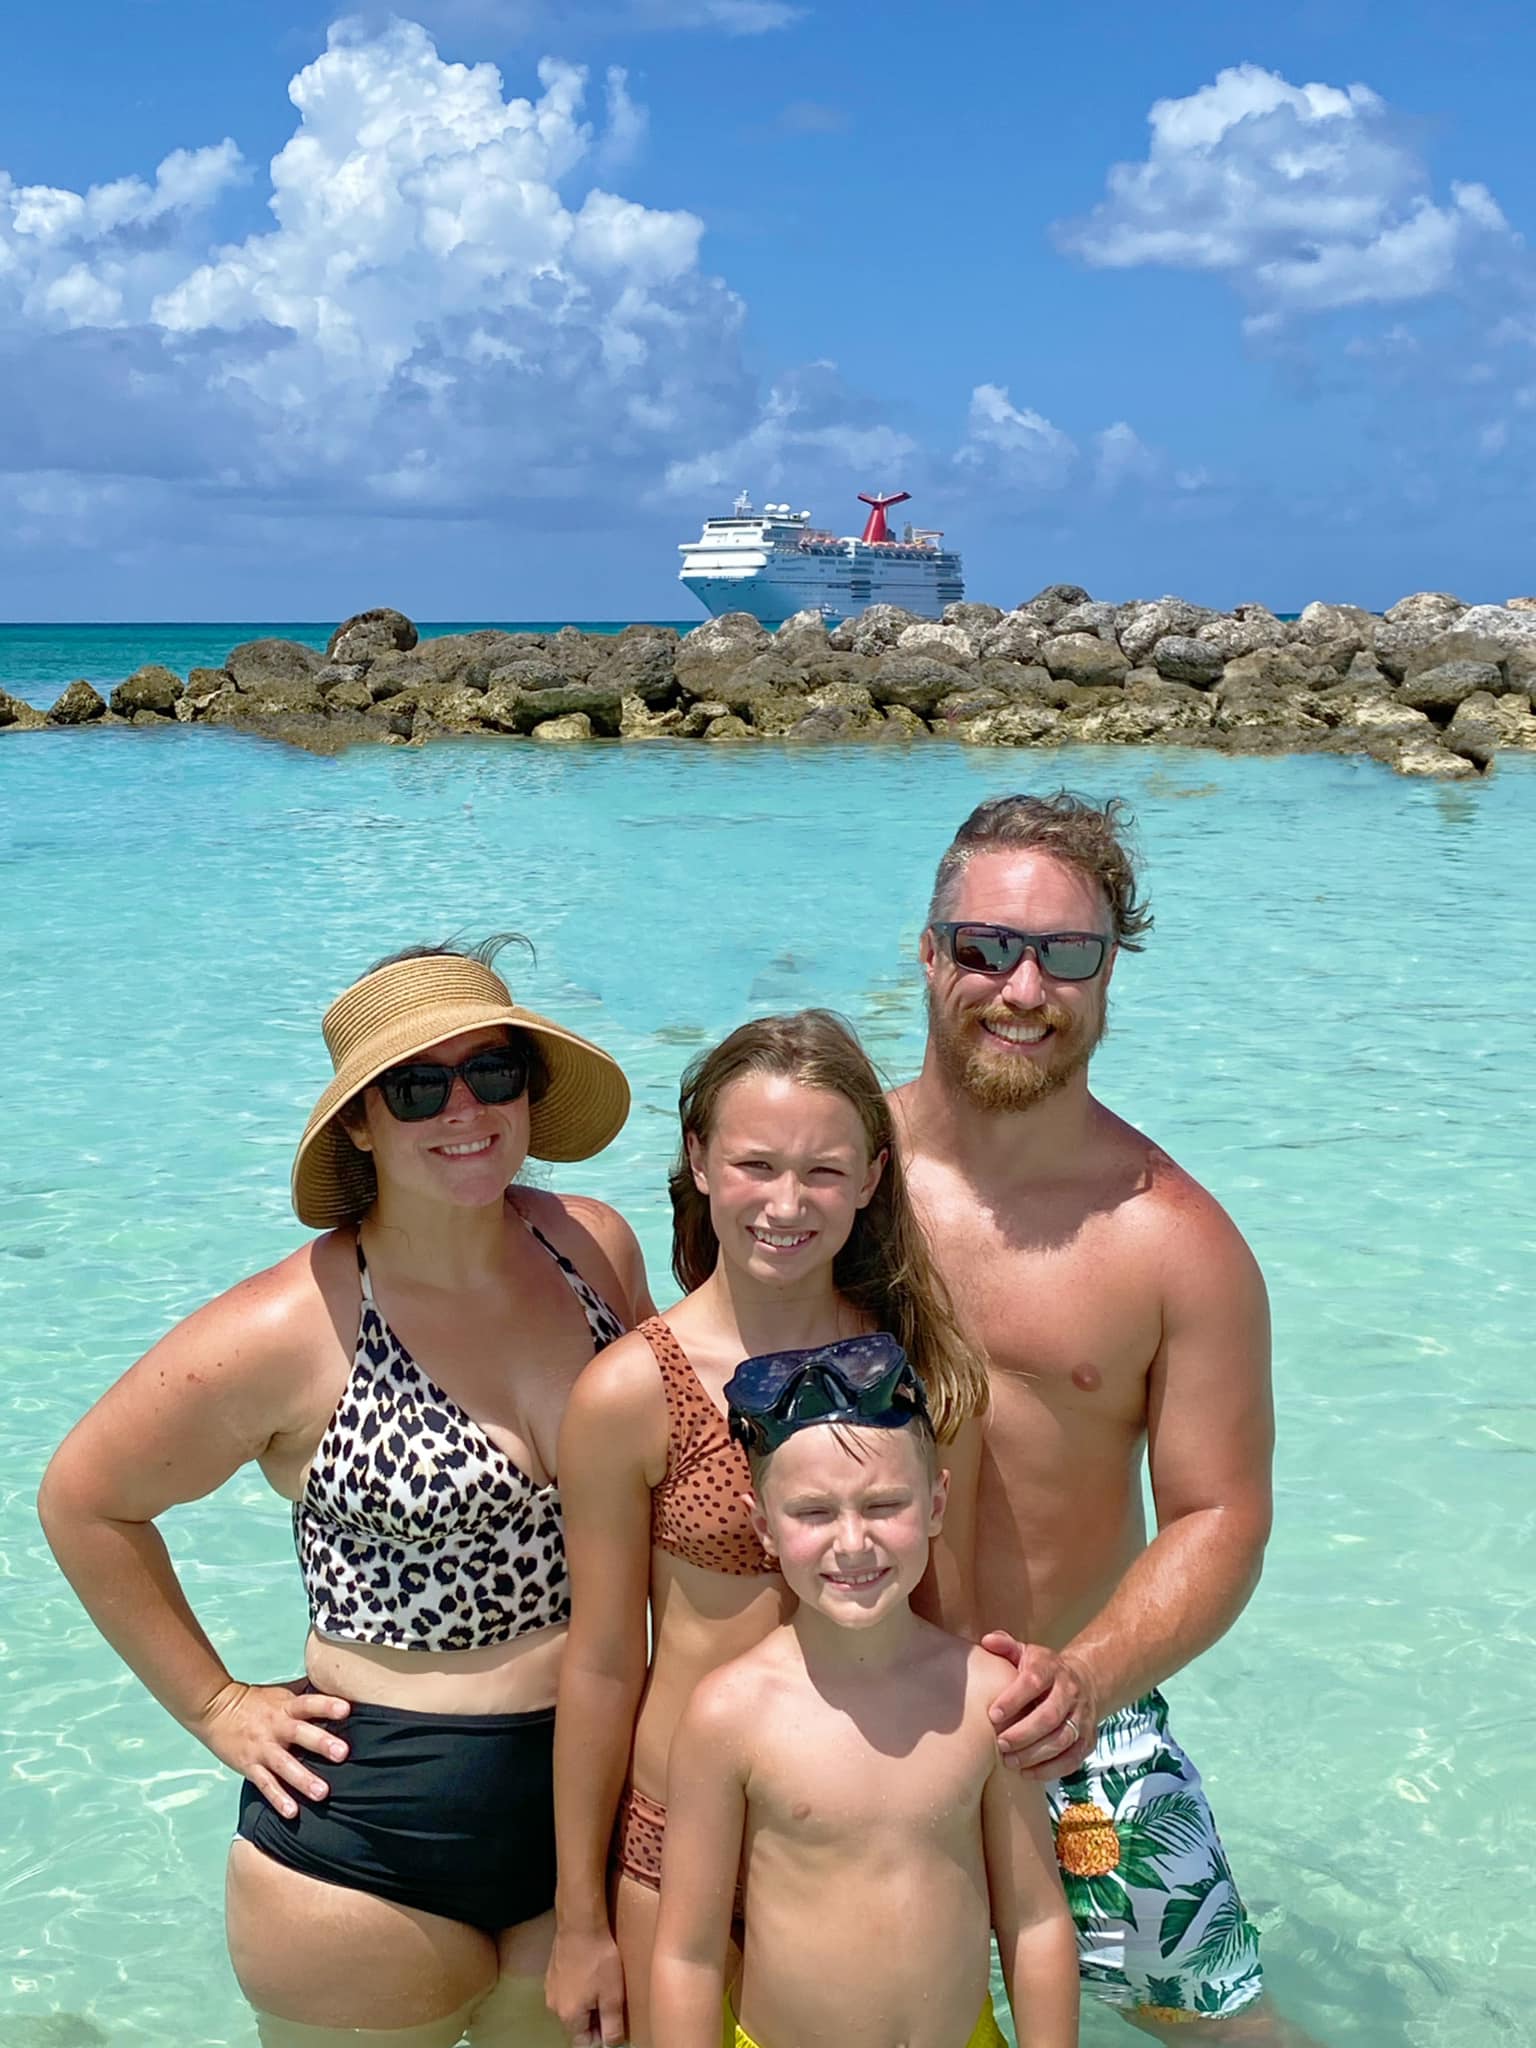 family of 4 in bathing suit at ocean in Bahamas. Carnival Cruise ship in background.